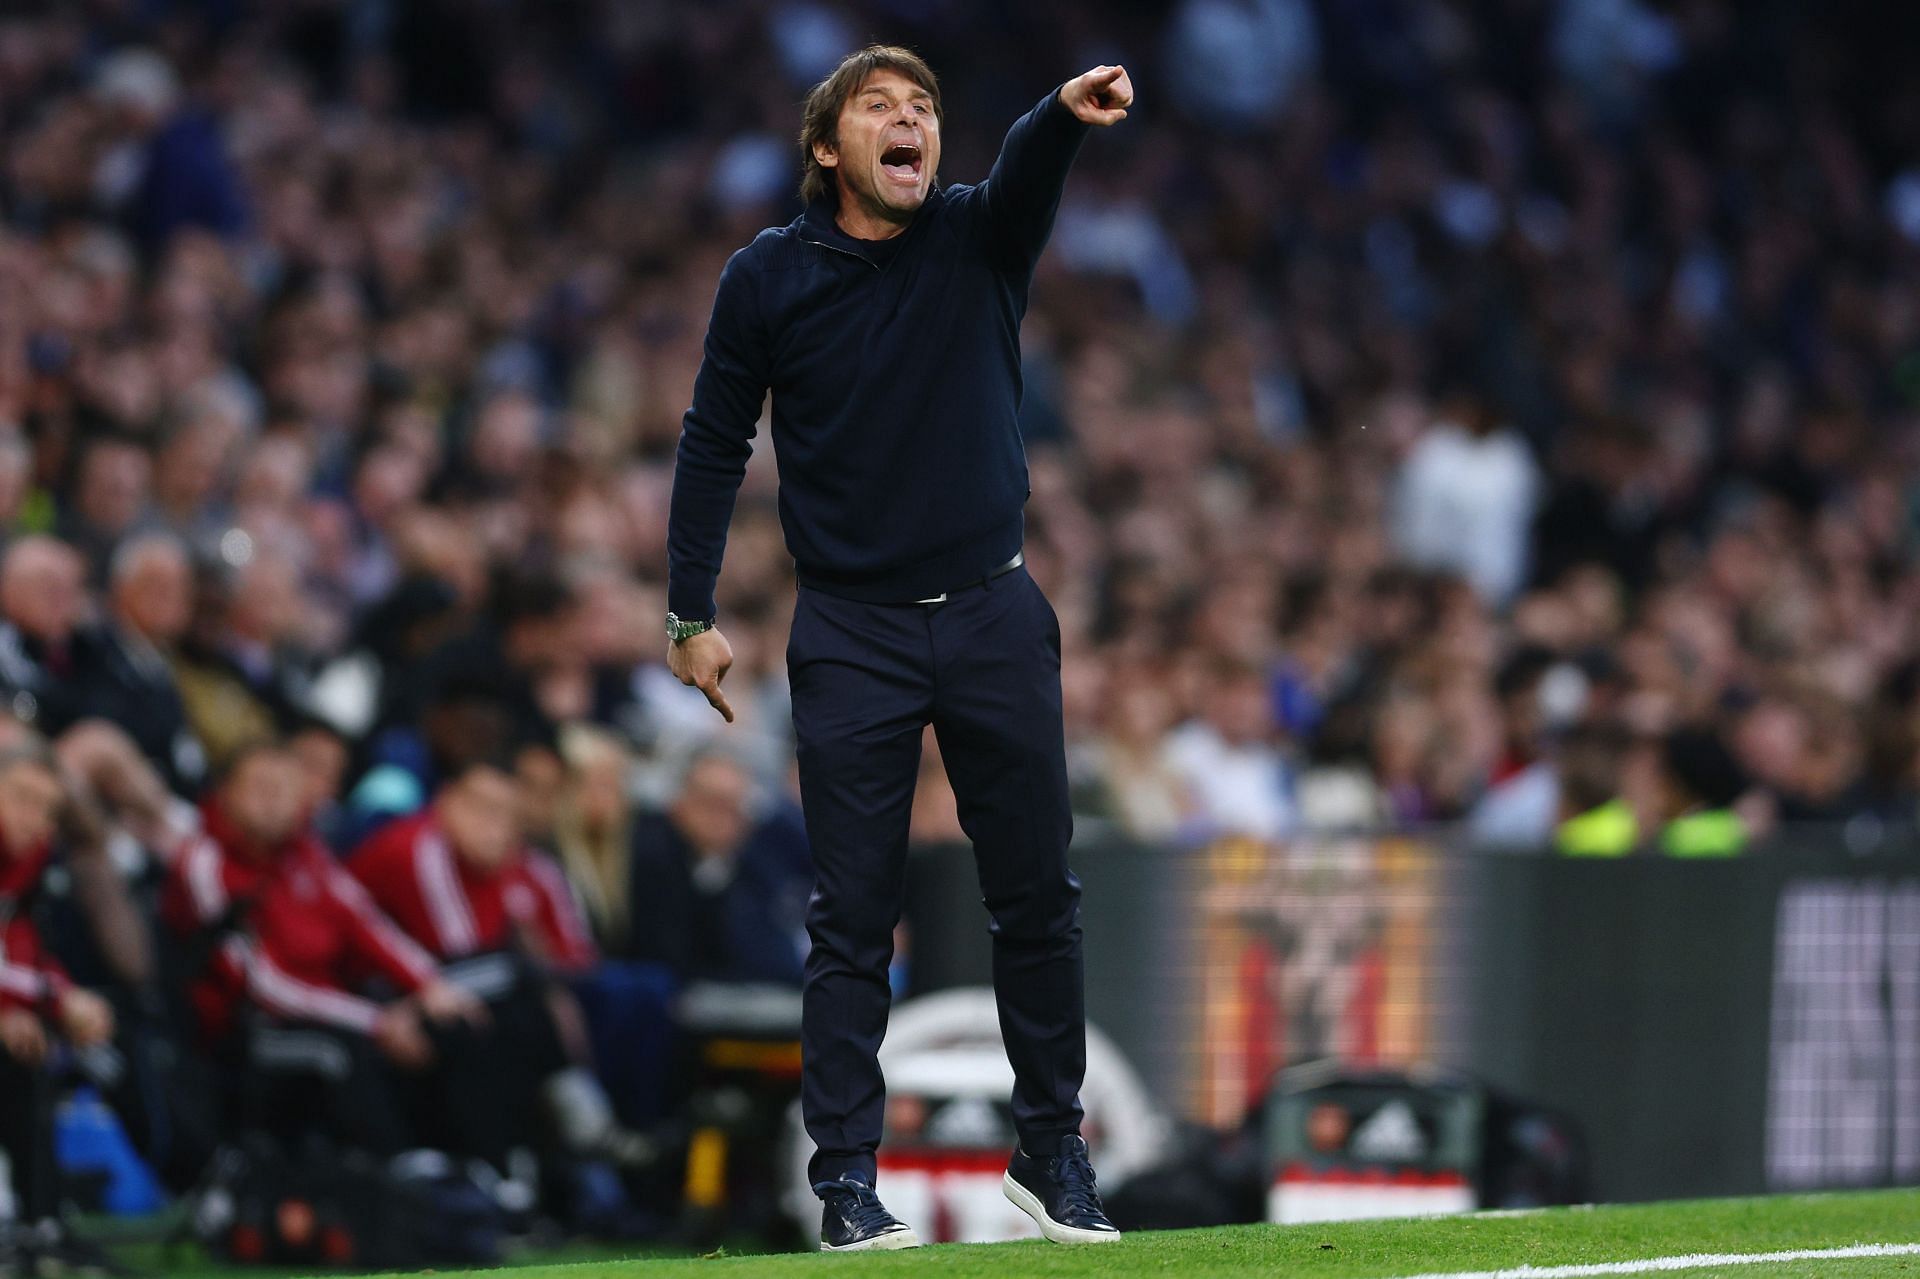 Antonio Conte and Tottenham are not out of the race just yet